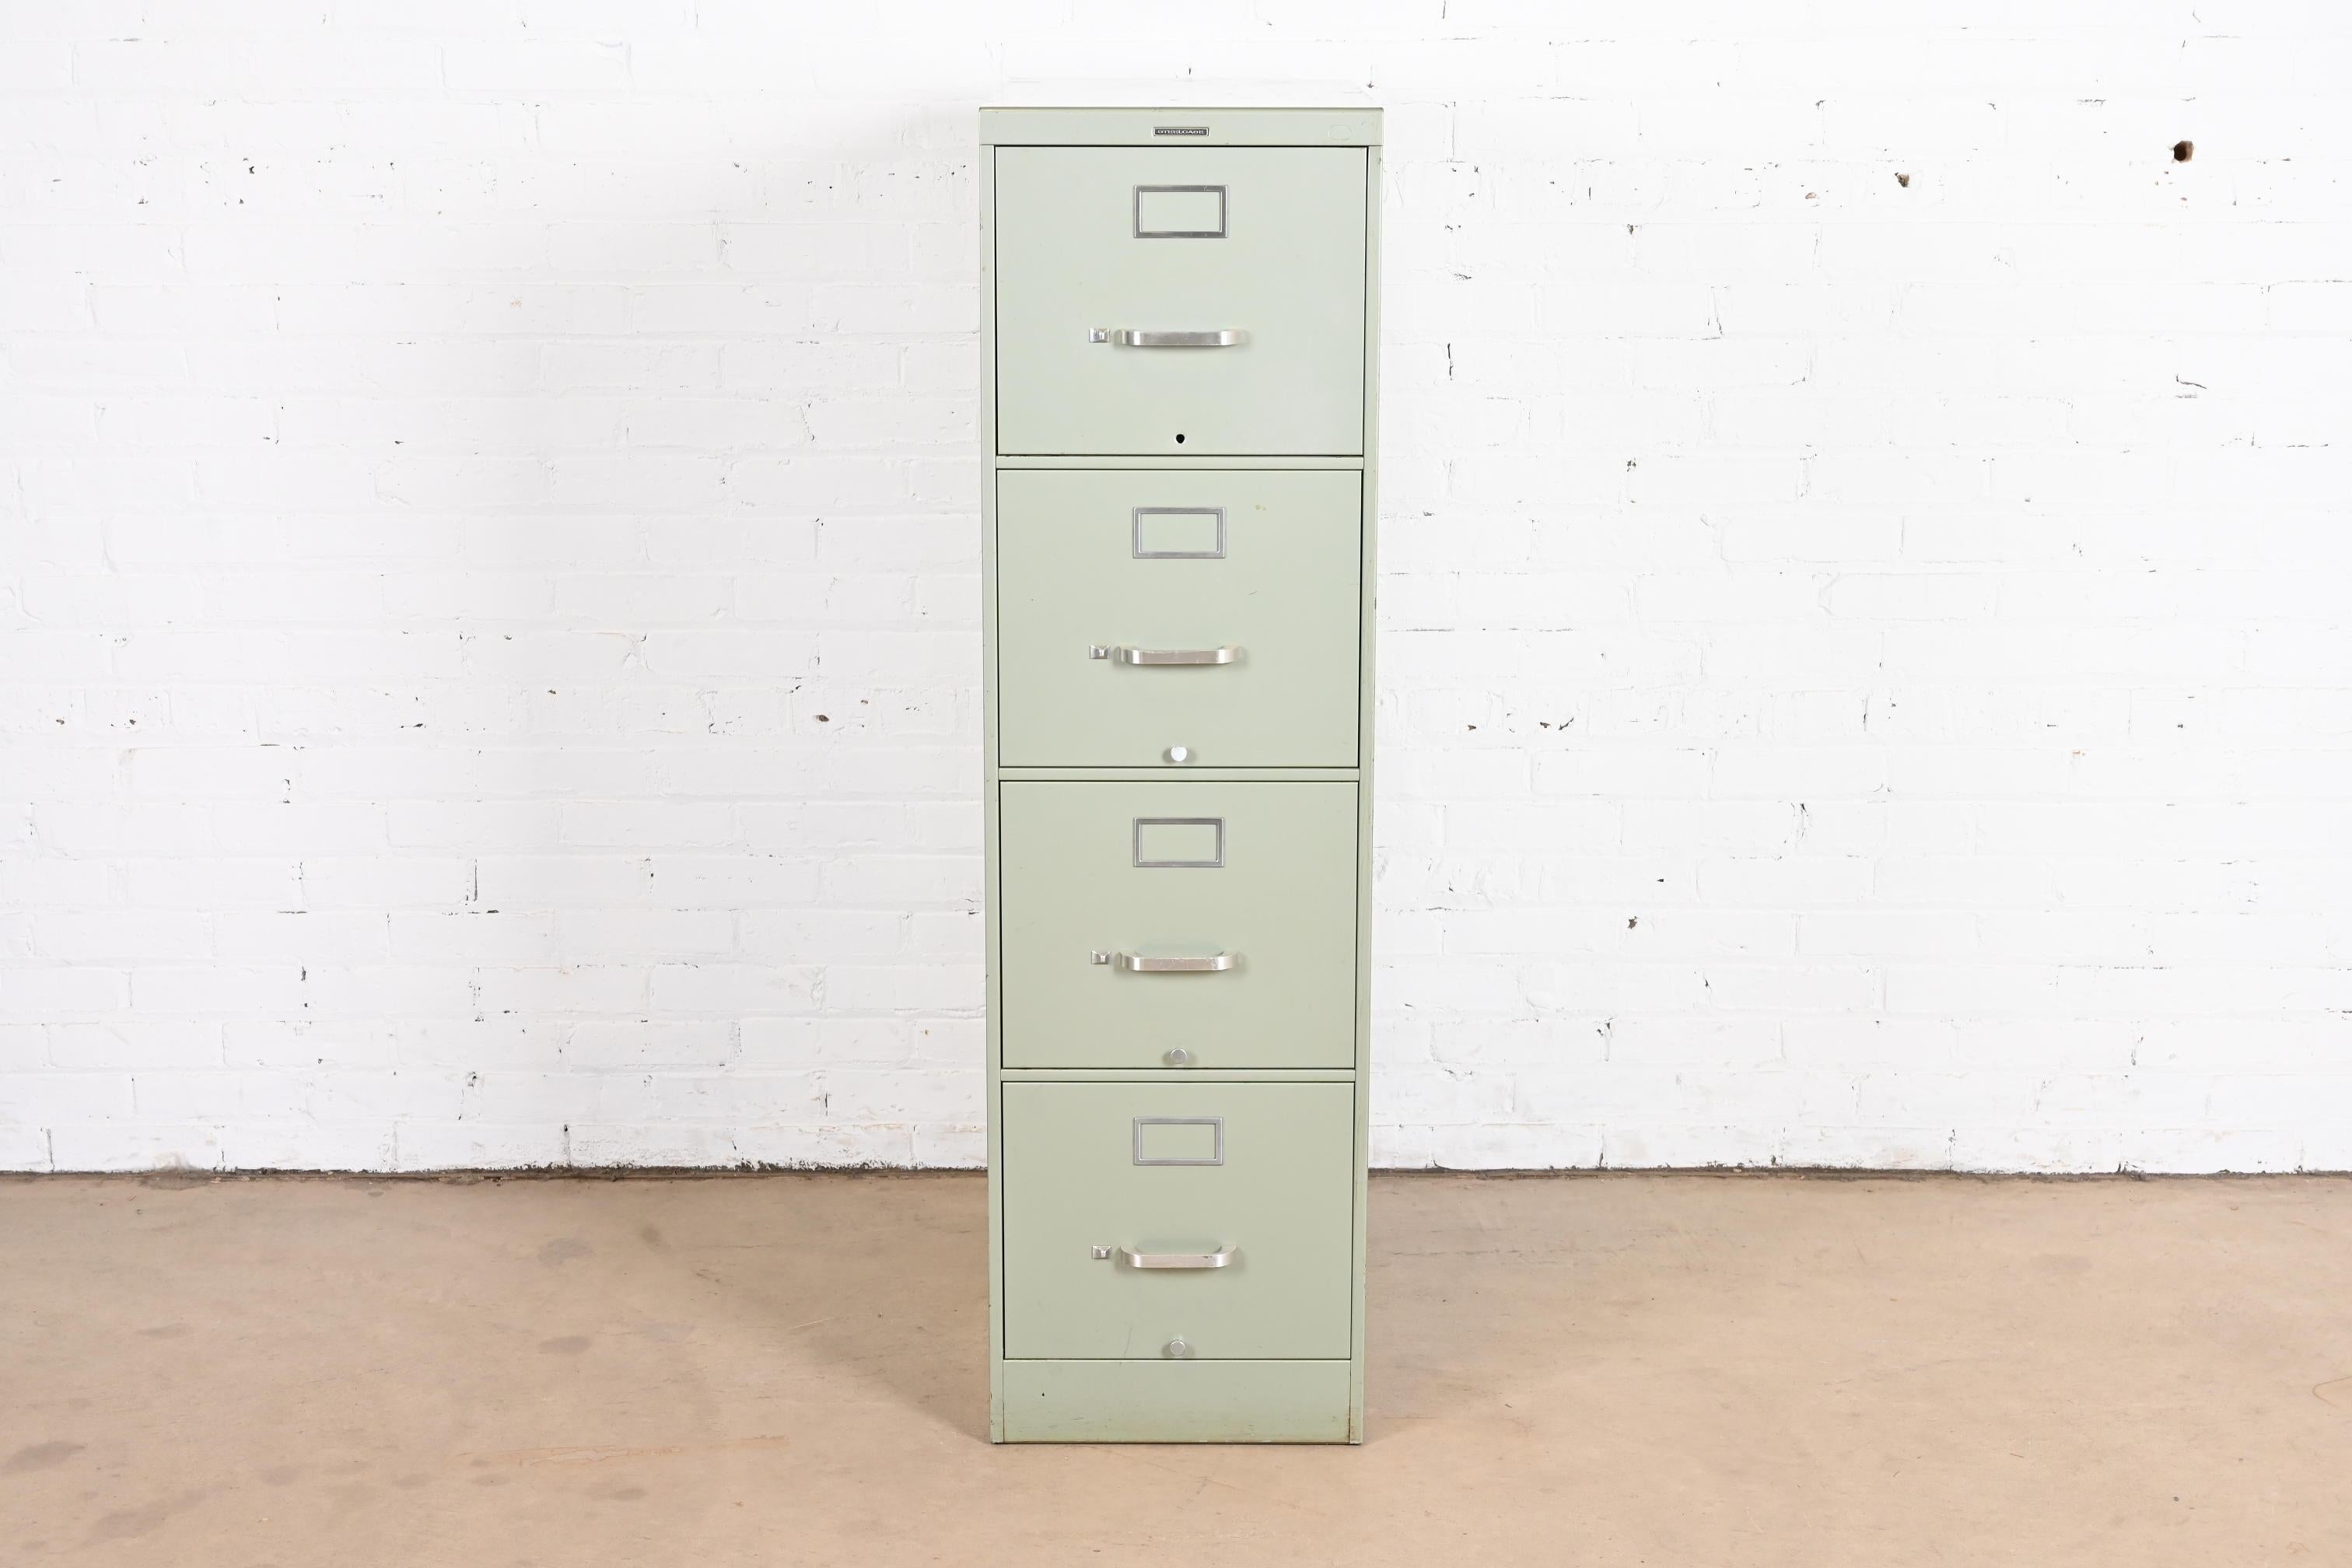 A nice industrial metal file cabinet

Procured from the University of Notre Dame

By Steelcase

USA, Mid-20th Century

Measures: 15